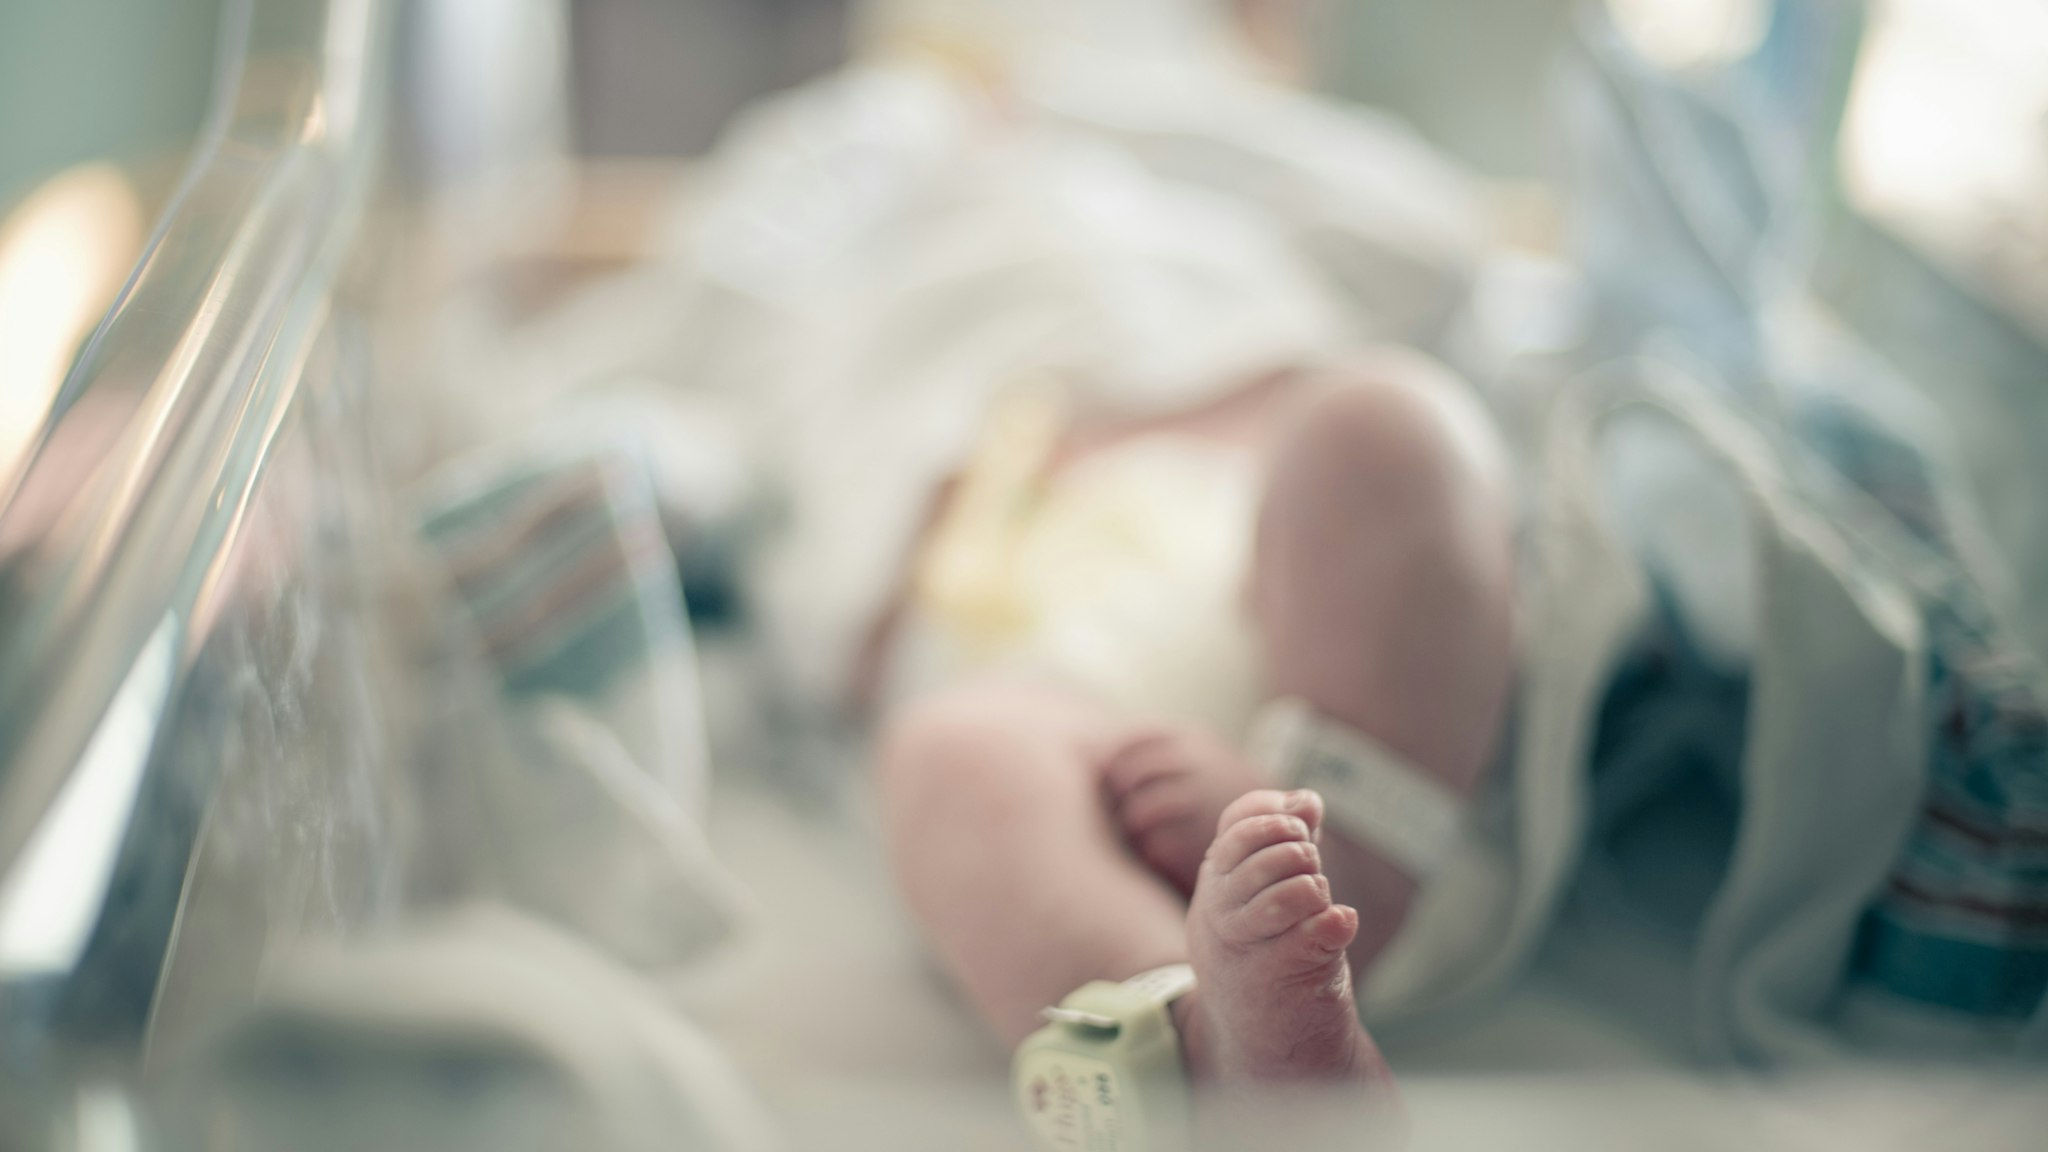 Newborn baby lies on its back surrounded by blankets in hospital bassinet with only its feet and ankle tracking bracelet in focus, photographed with shallow depth of field allowing for ad space.